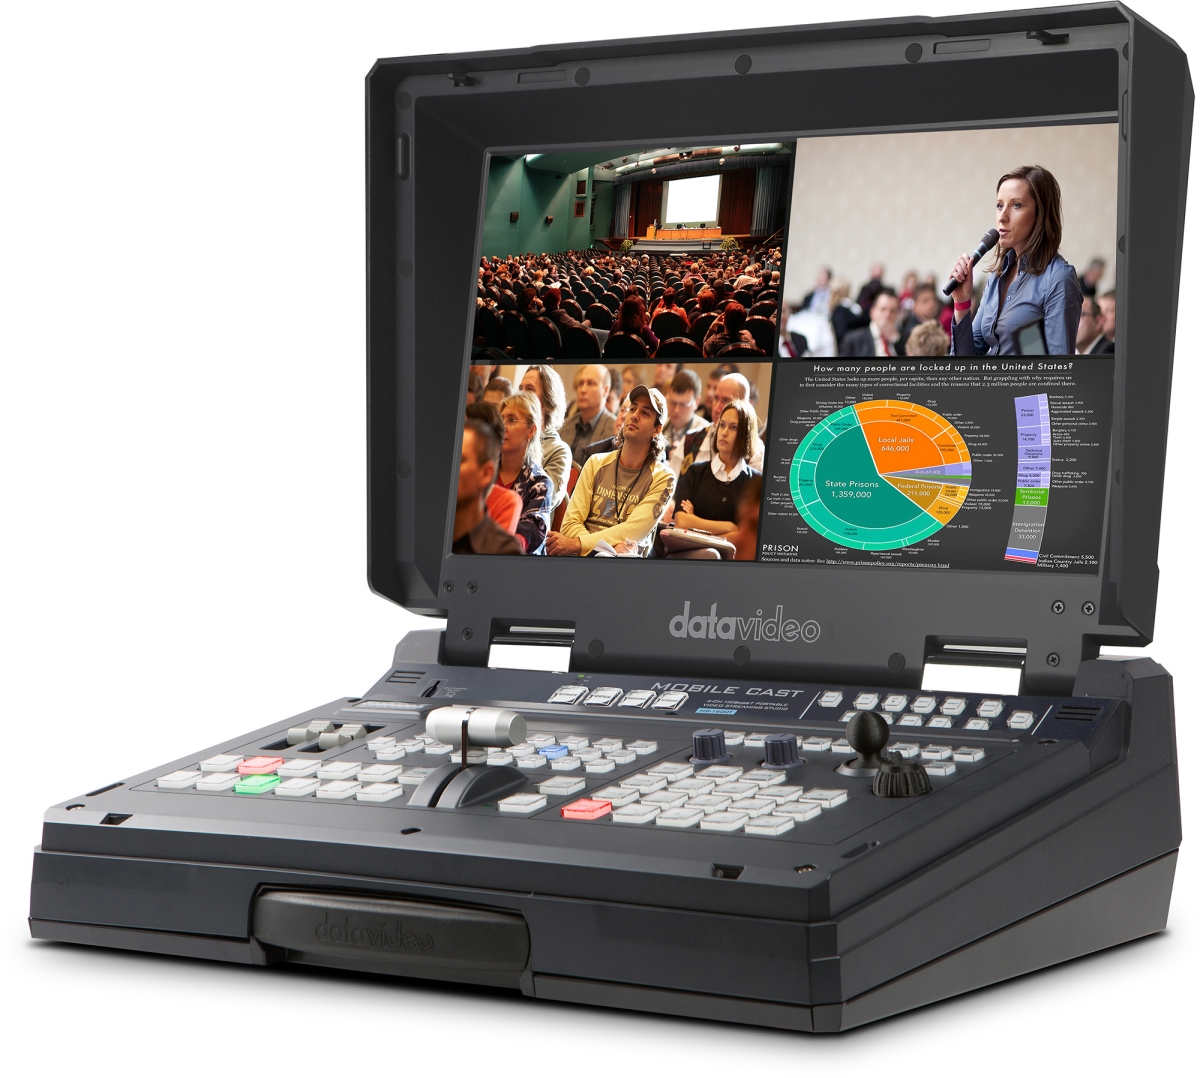 Picture of Datavideo DV-HS1600TMKII 4-Input HDBaseT Production Switcher with Built-In Streaming Encoder & Recorder